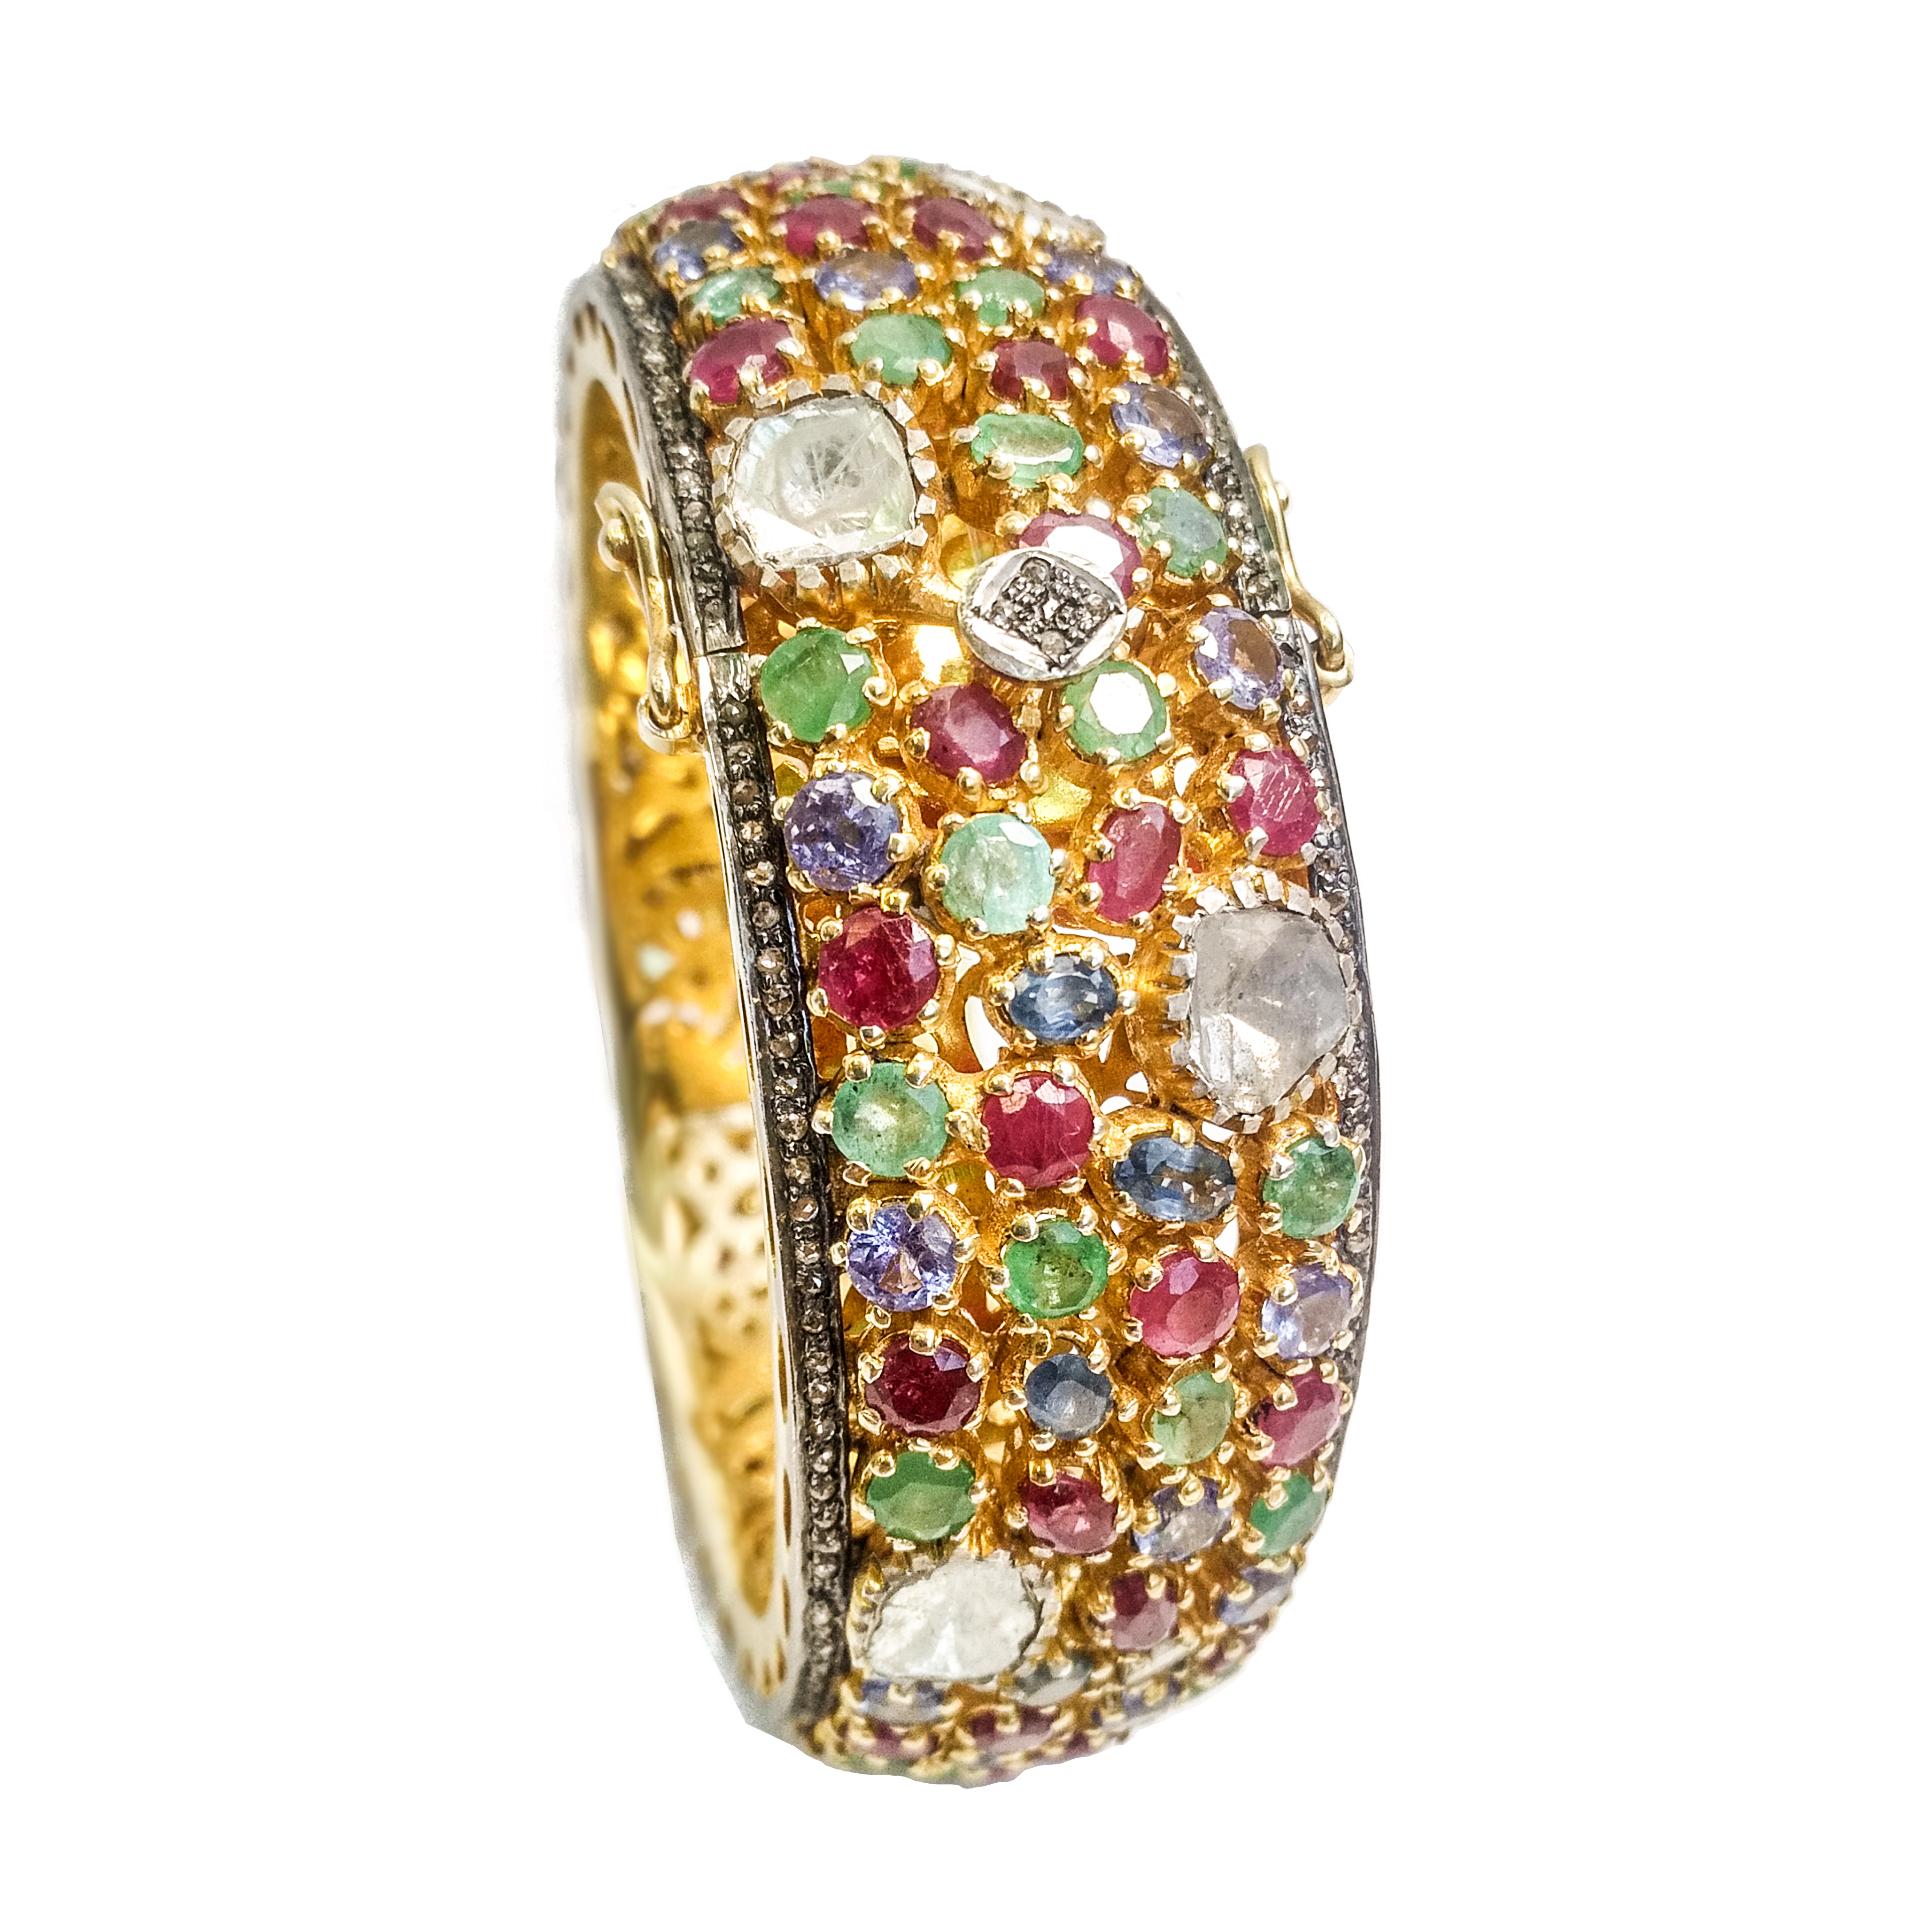 Colorfull striking bangle, Lively multi color gemstones & fancy shape rose cut diamond (polki) bangle. Contemporary handcrafted vibrant round & oval faceted sapphires, emerald, rubies & diamonds encased in bezel milgrain mount, accented with